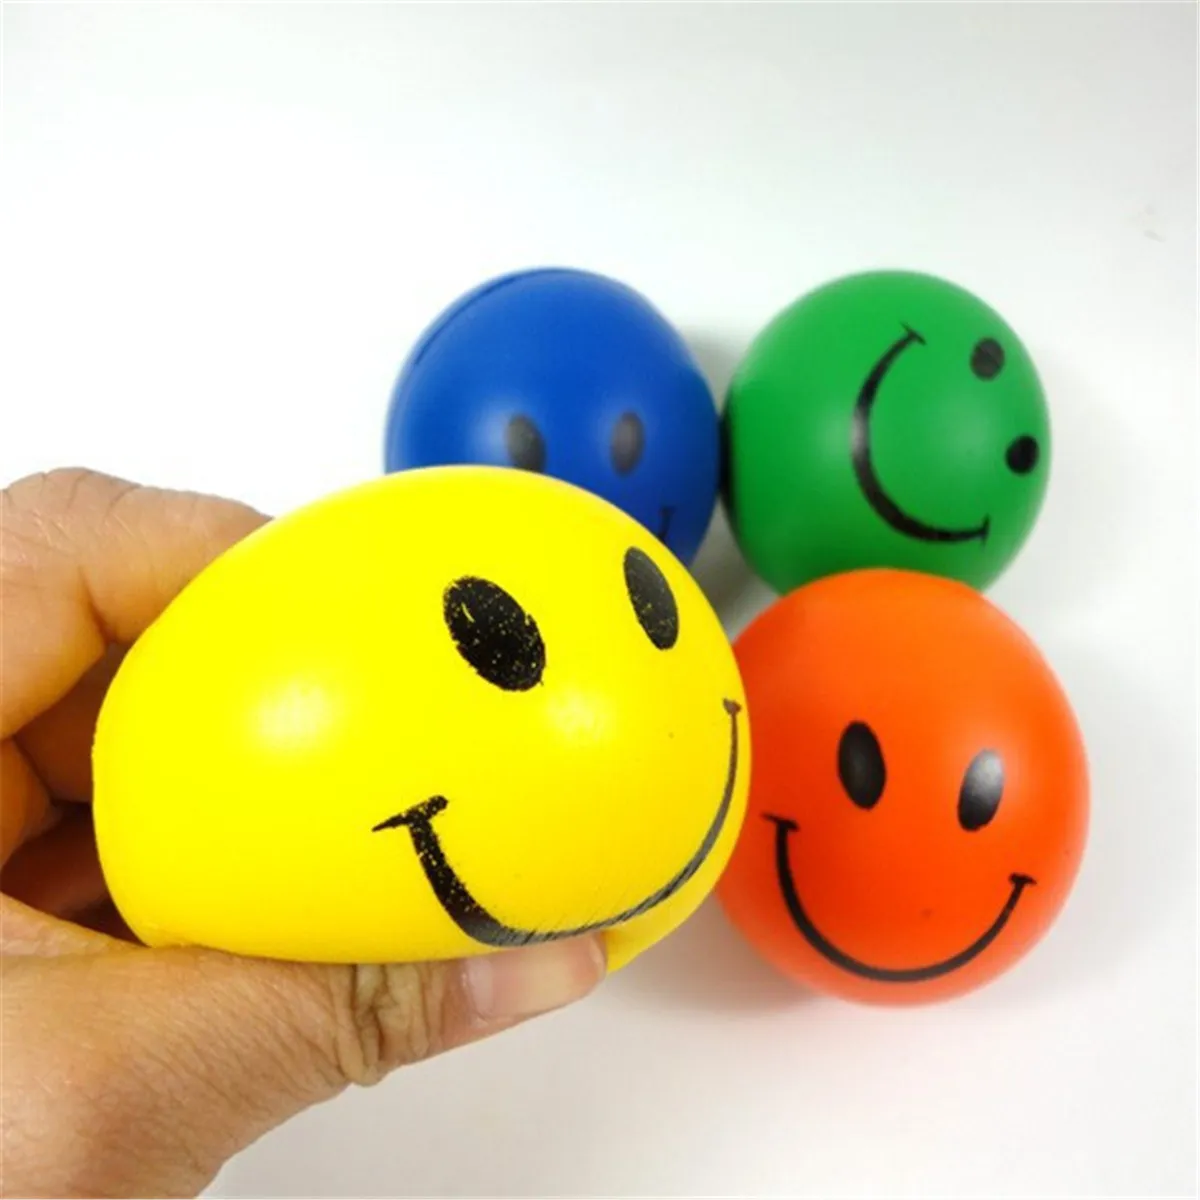 New Fashion Diameter 7cm Face Print Sponge Foam Ball Squeeze Stress Ball Relief Toy Hand Wrist Exercise Rubber Toy Balls5464580